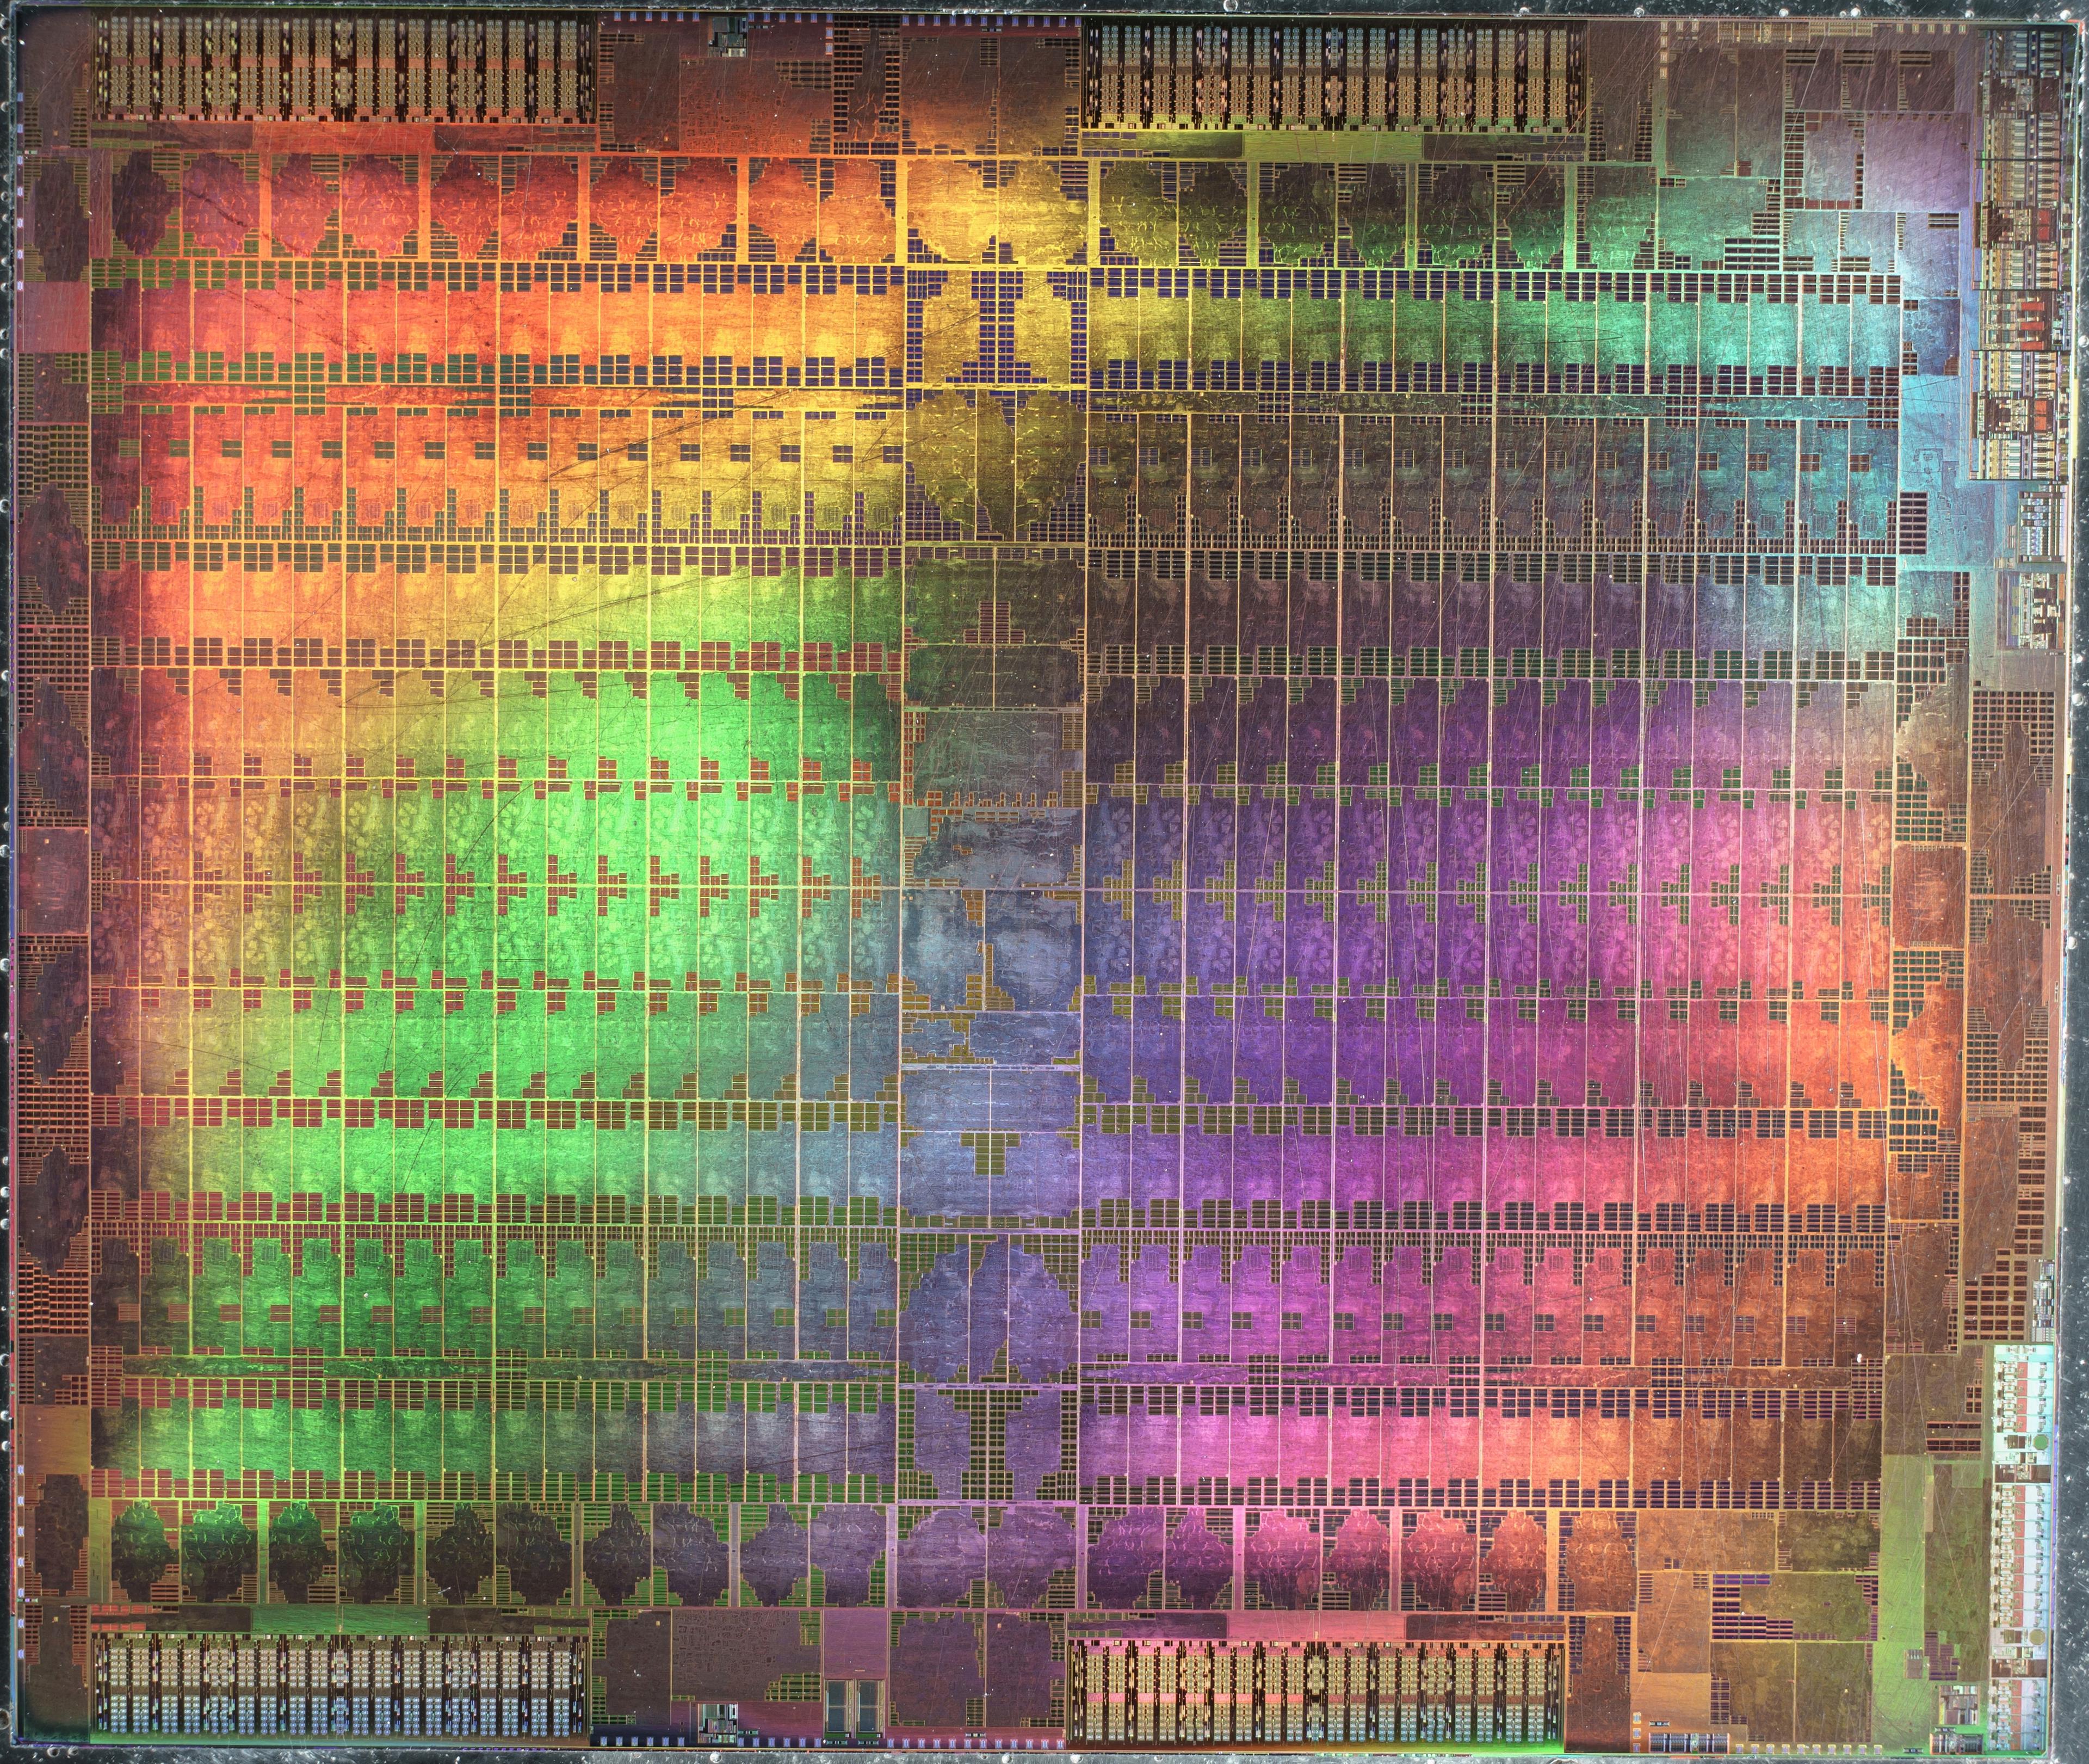 Abstract microscopic photography of a Graphics Processing Unit in rainbow colors